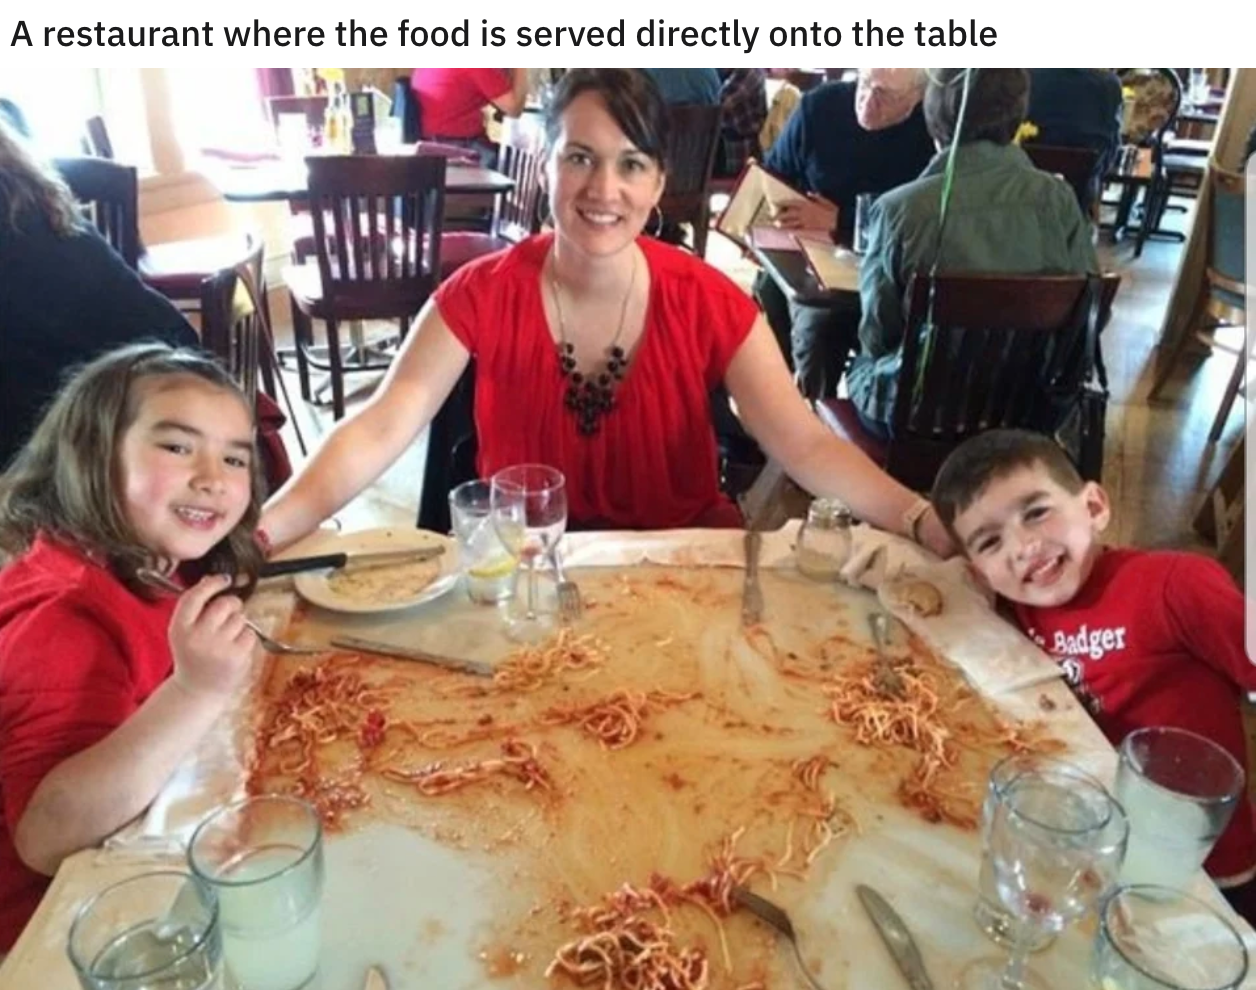 funny food pics - A restaurant where the food is served directly onto the table